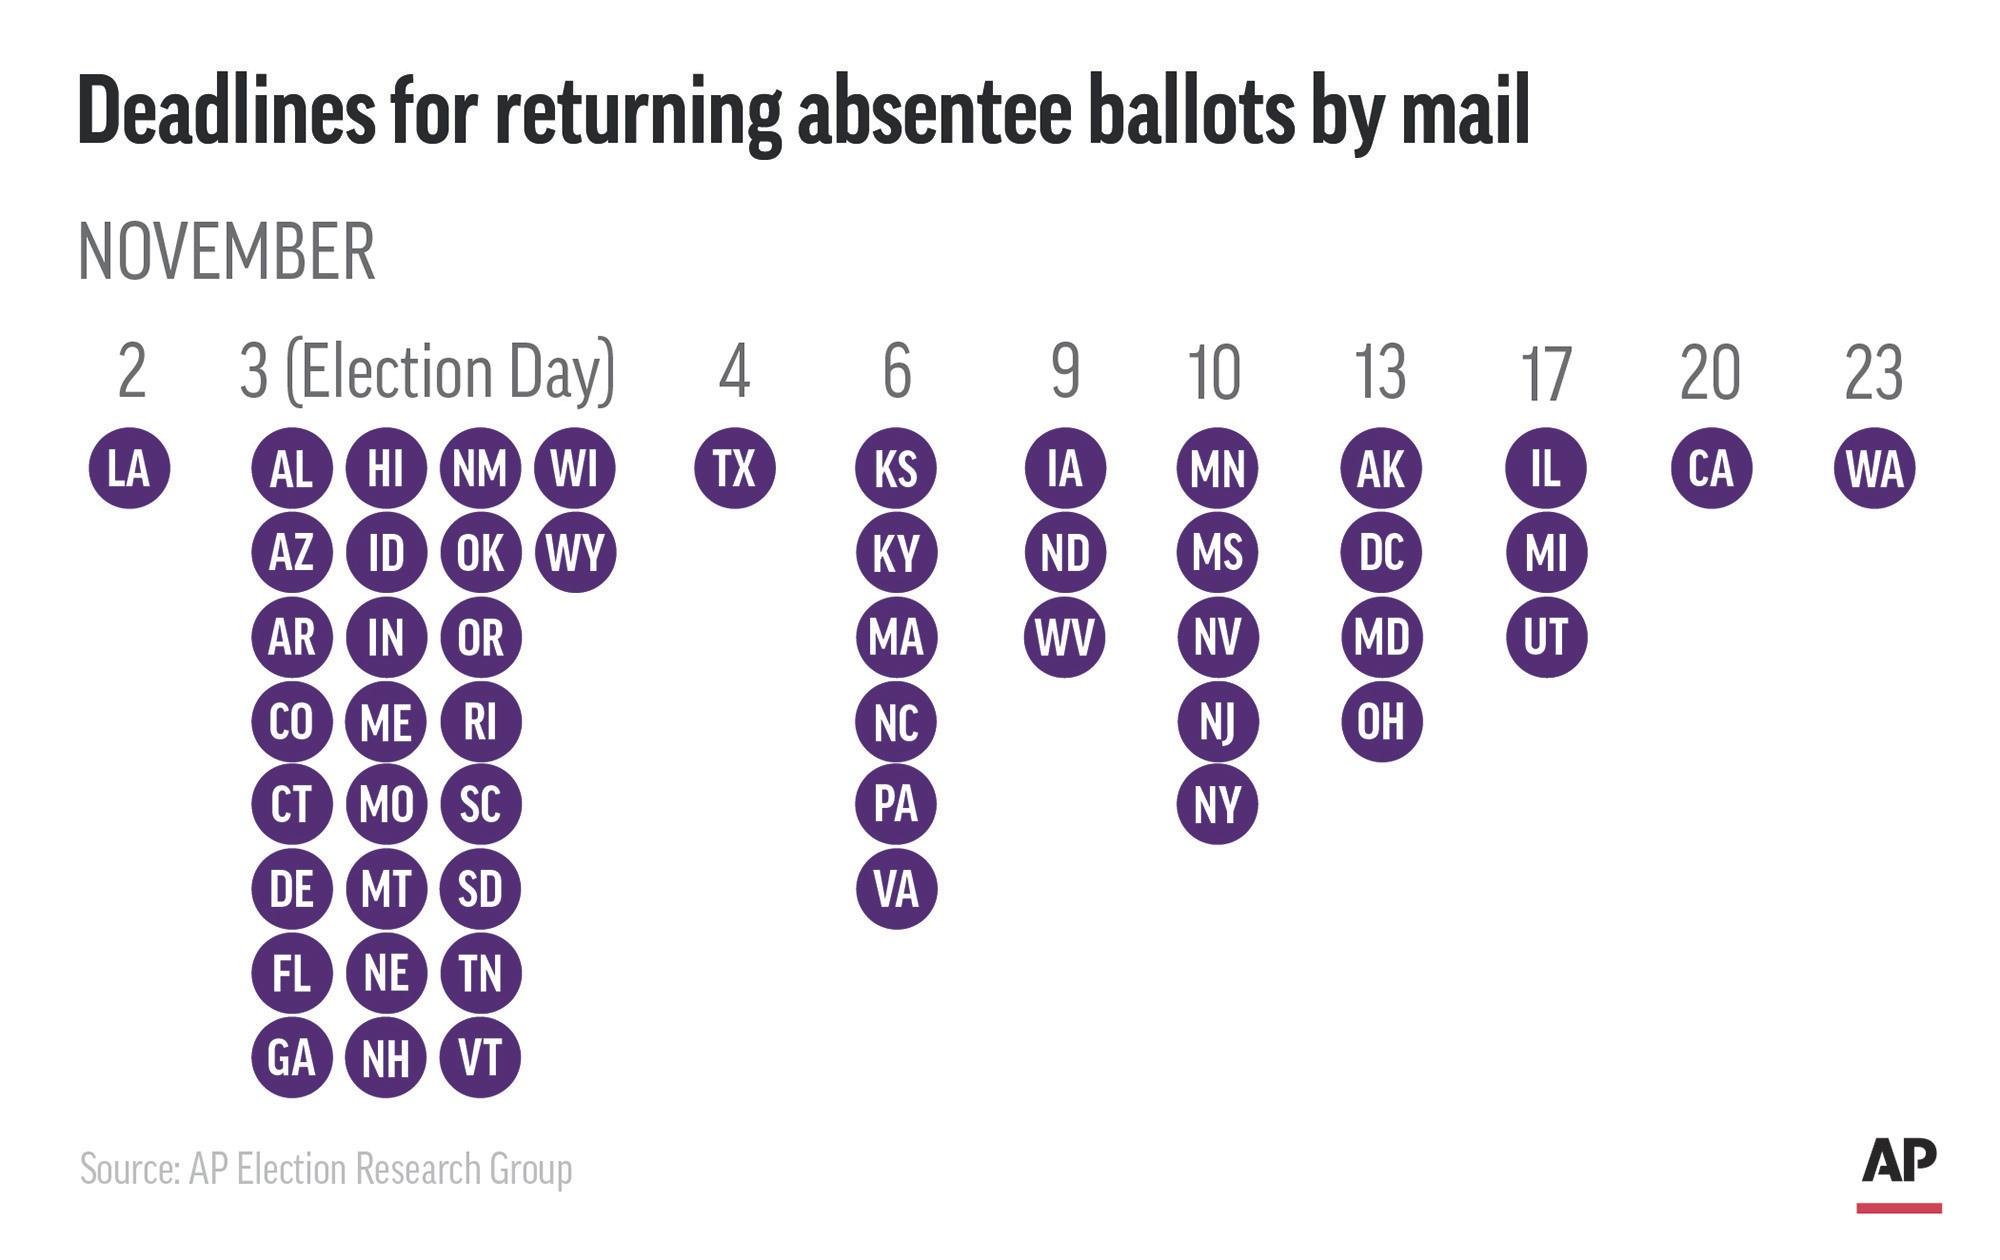 Deadline dates by state for absentee ballots to be returned by mail. (Click to enlarge.)